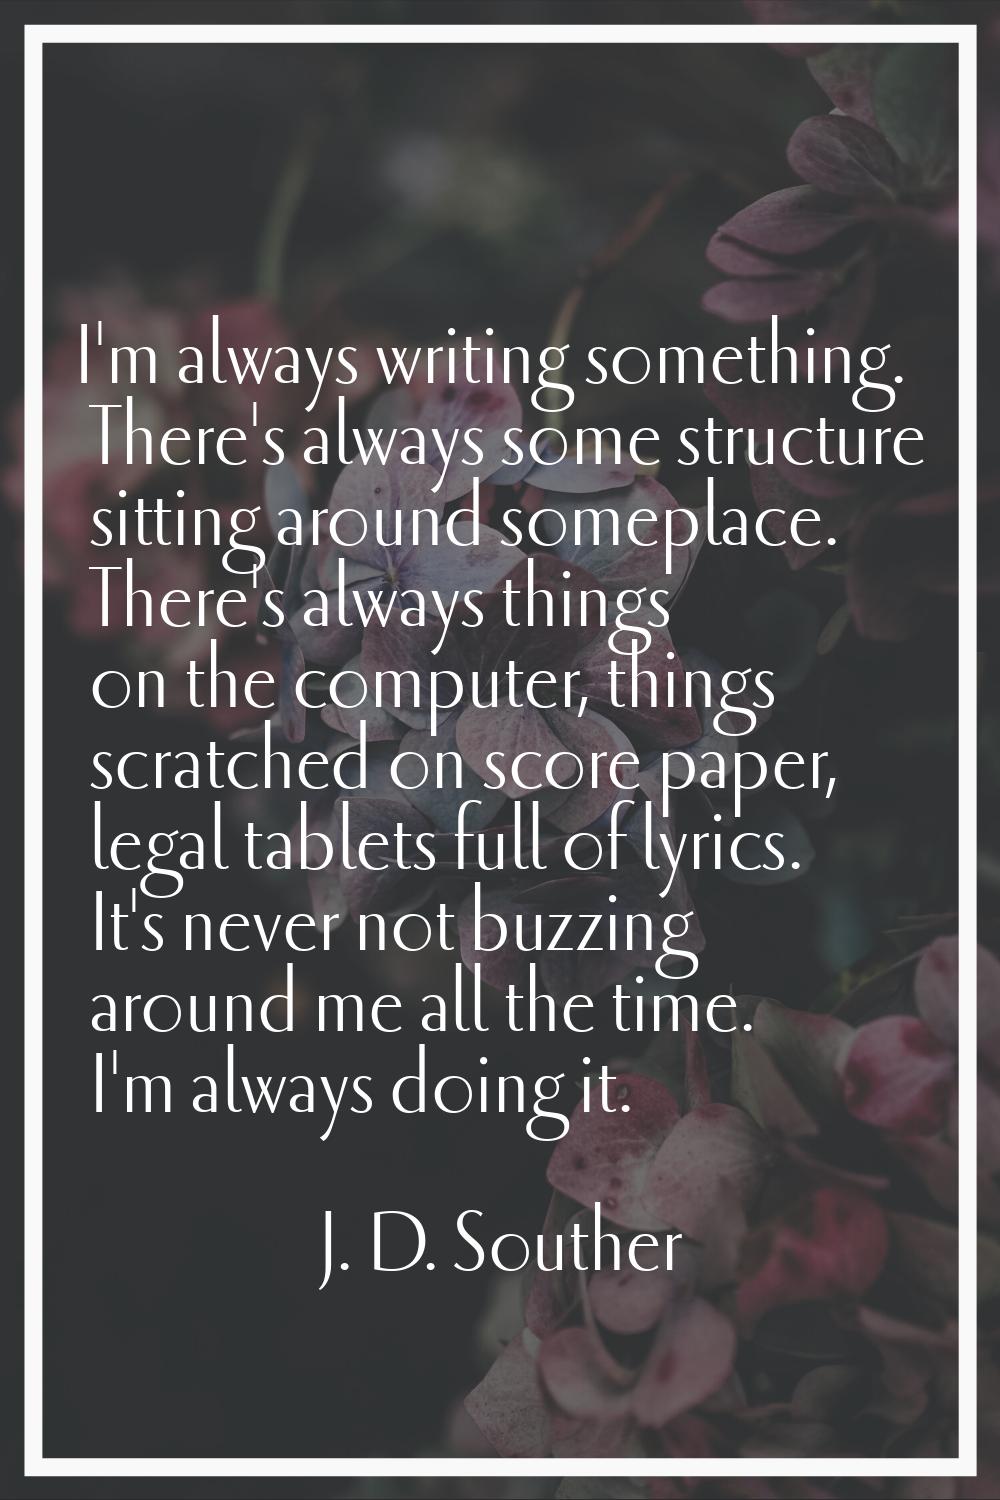 I'm always writing something. There's always some structure sitting around someplace. There's alway